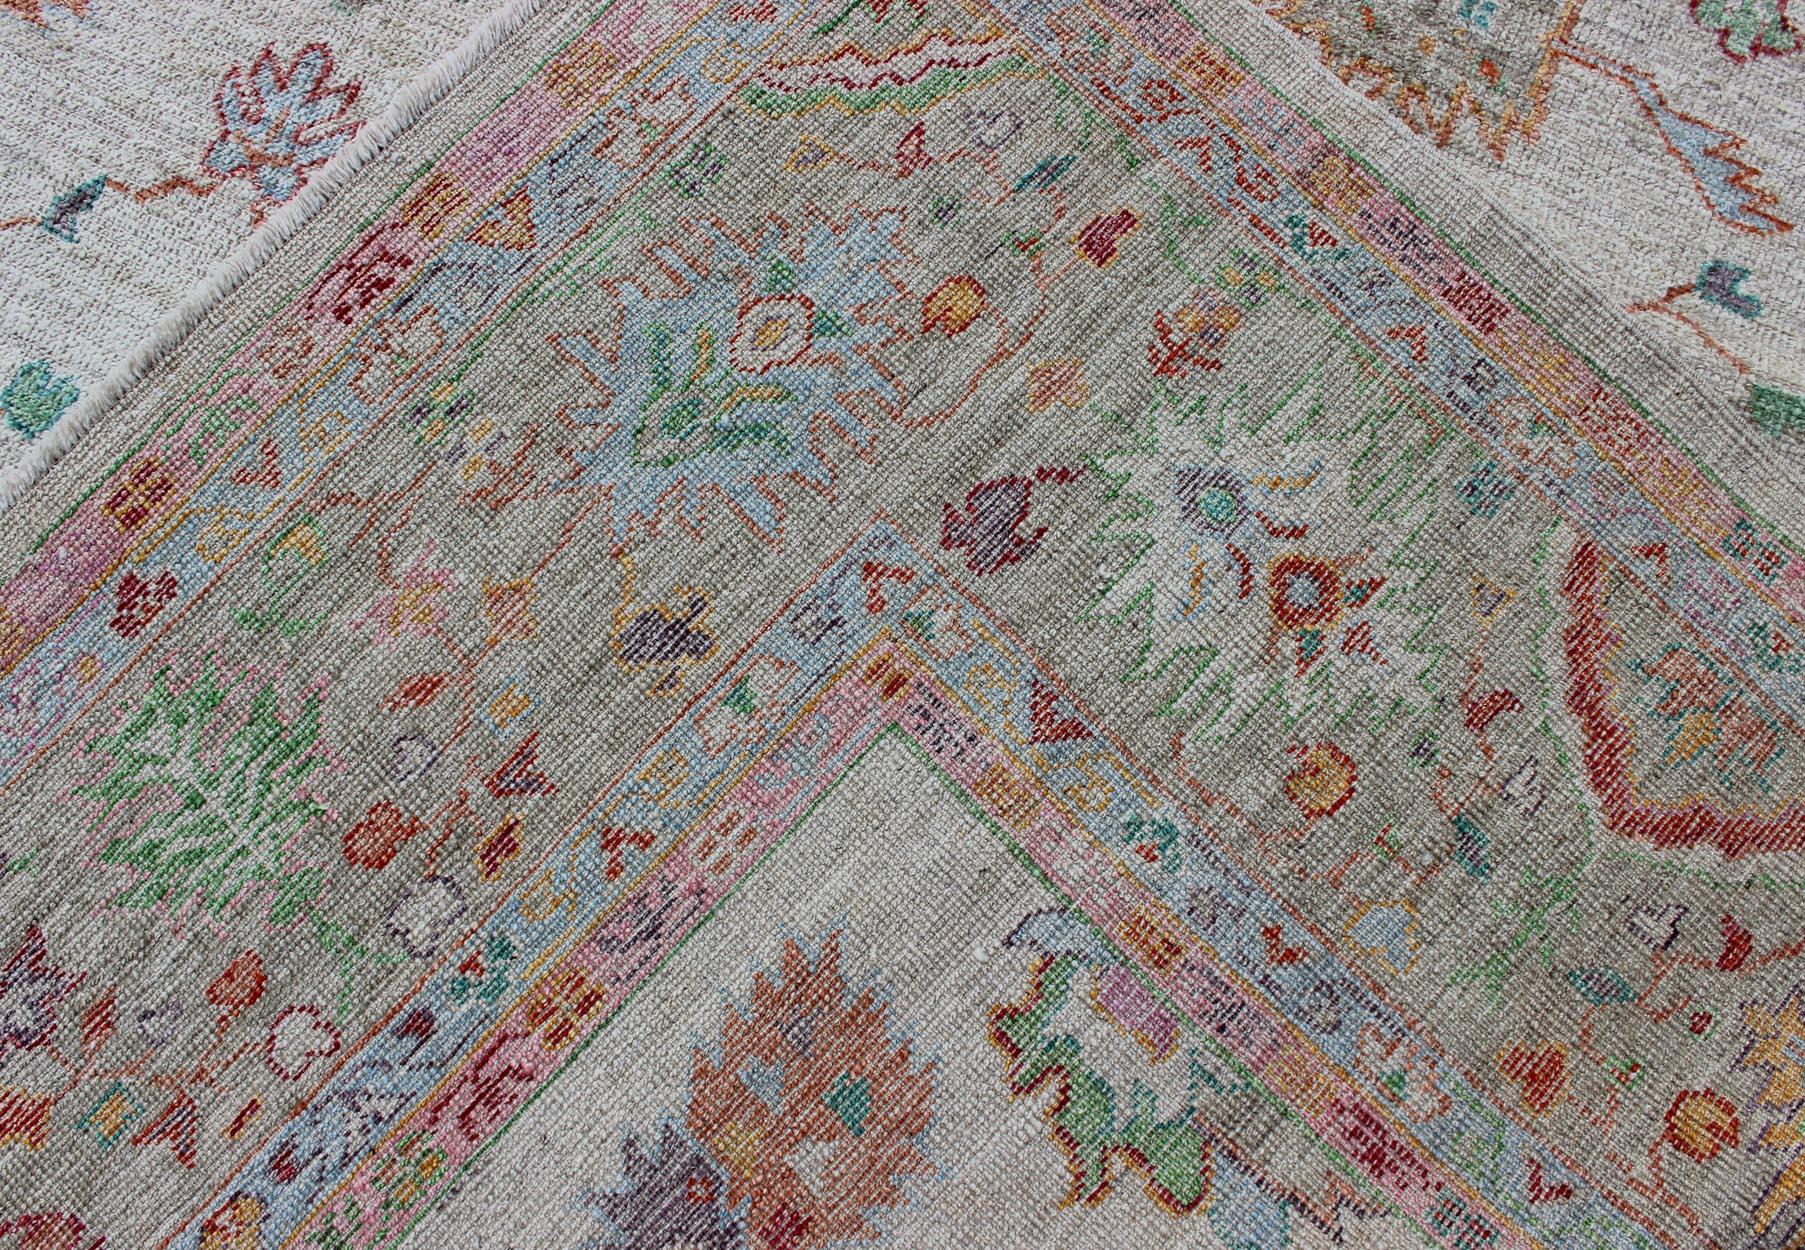 Angora Turkish Oushak Rug in Colorful Palette In Excellent Condition For Sale In Atlanta, GA